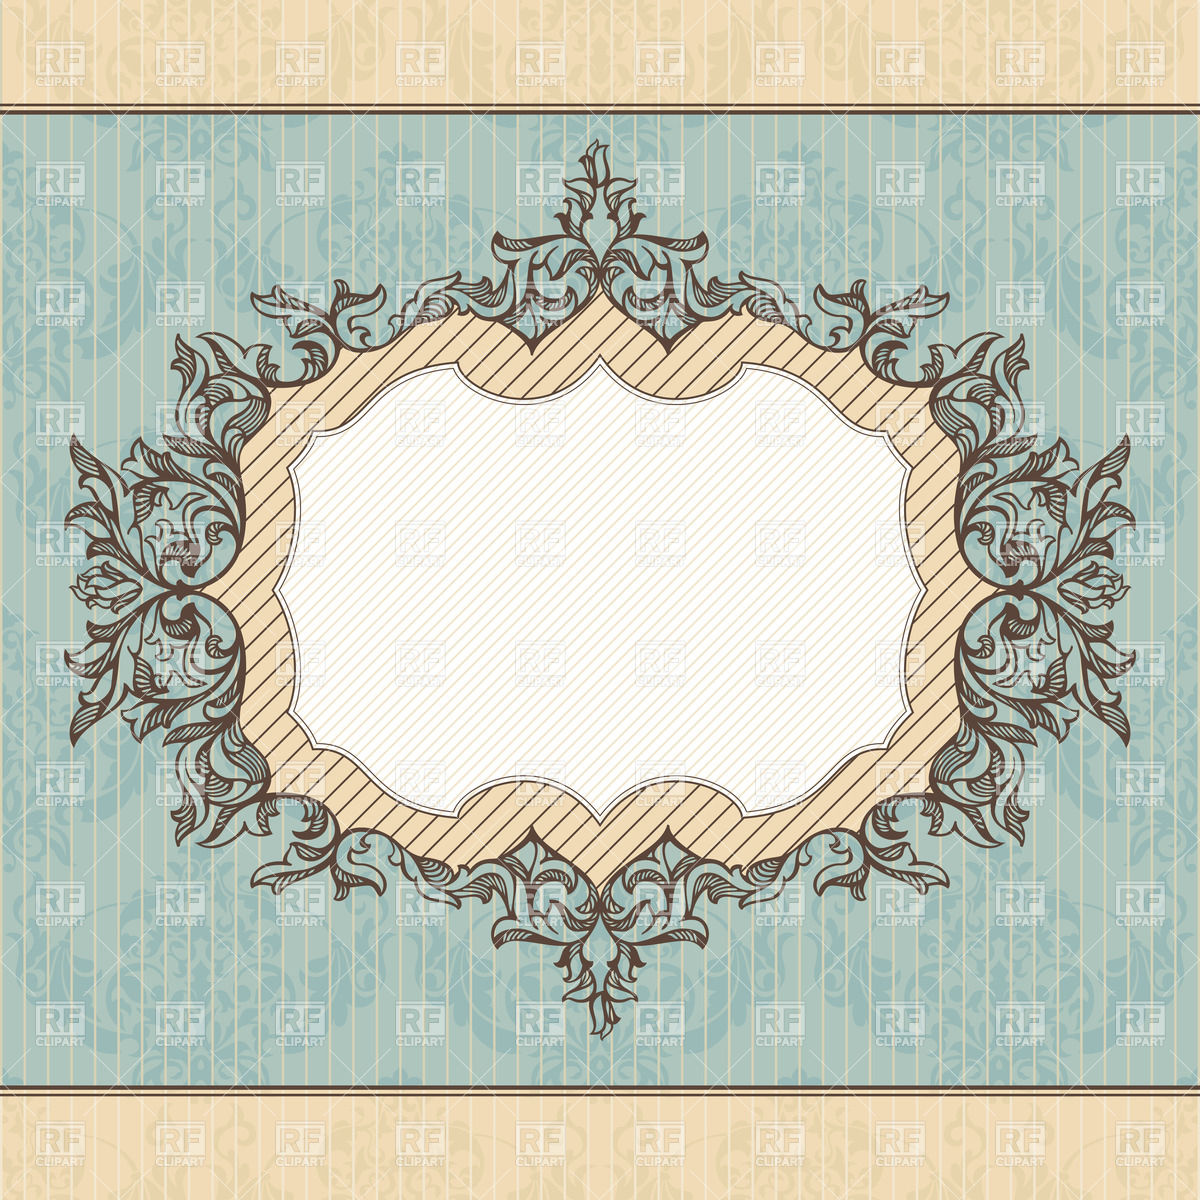     Retro Royal Frame 37310 Download Royalty Free Vector Clipart  Eps